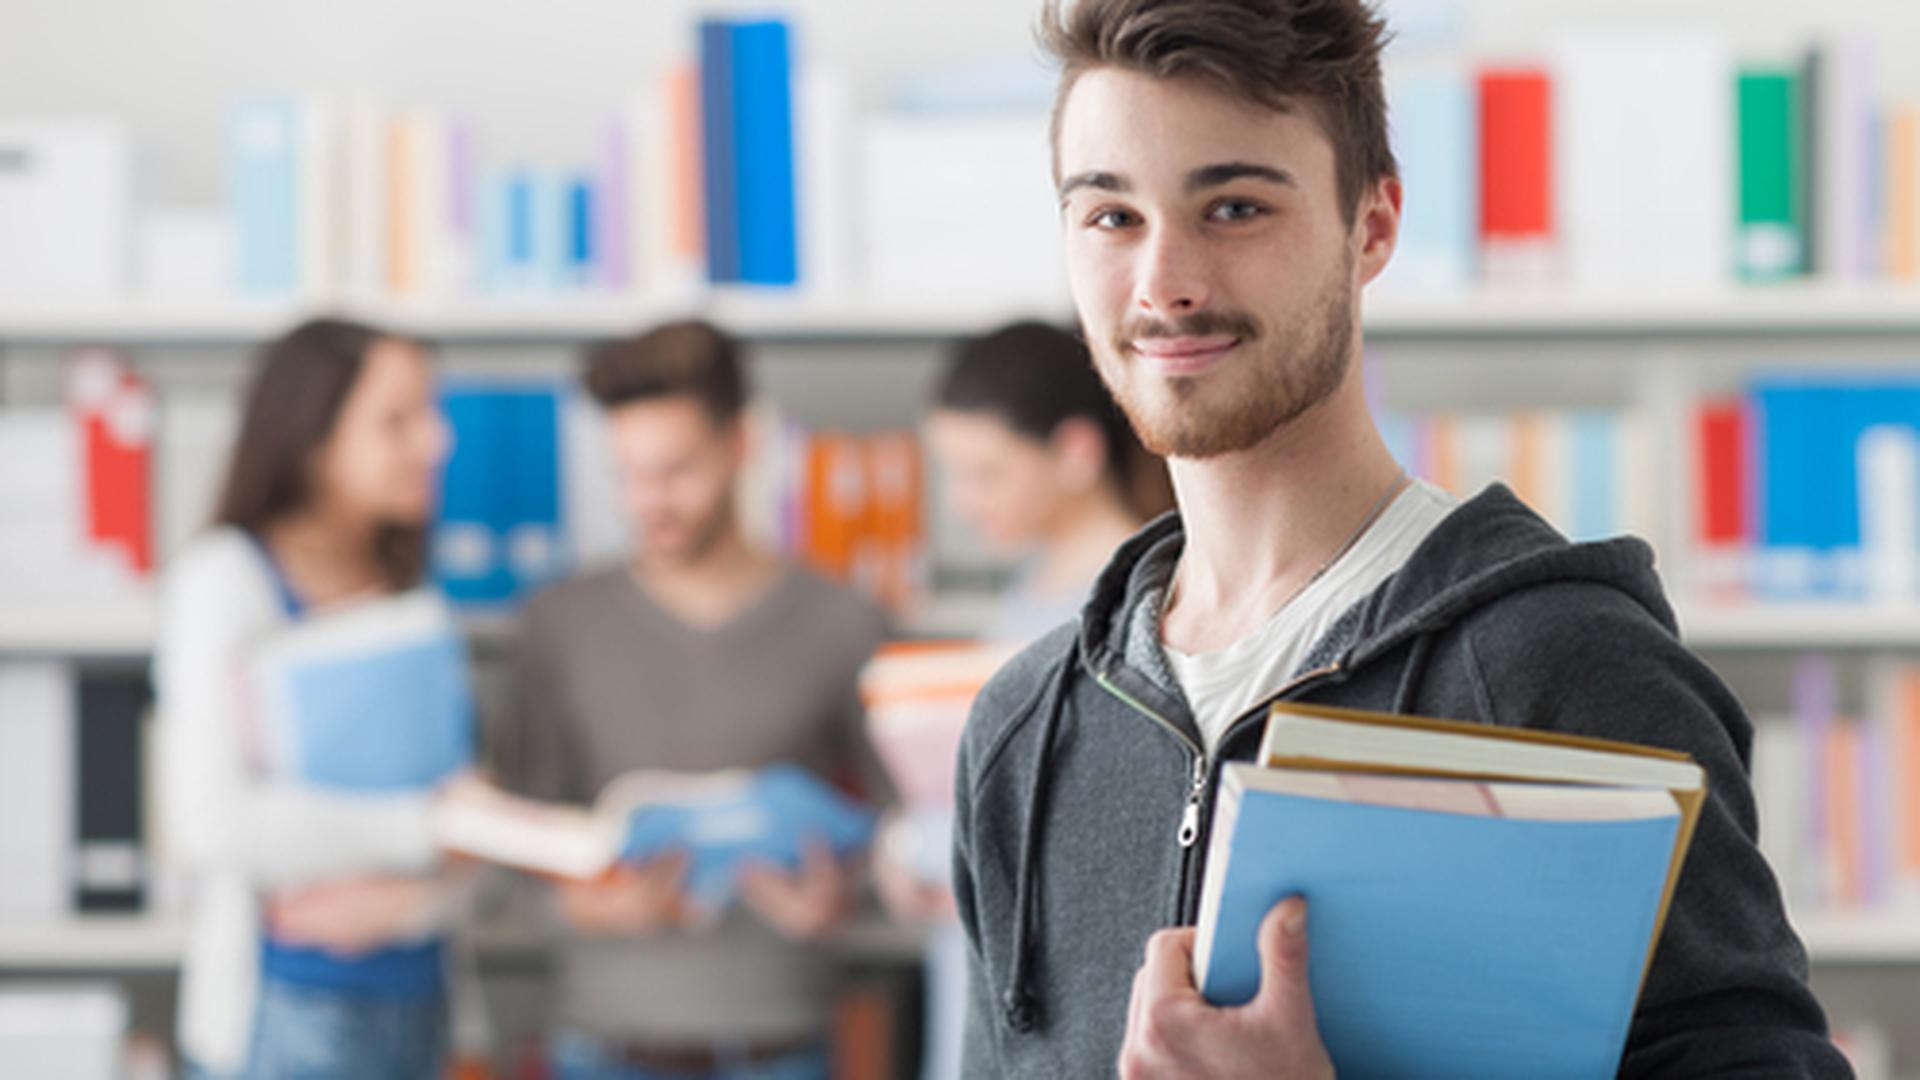 Student grants can cover tuition fees Photo: Shutterstock